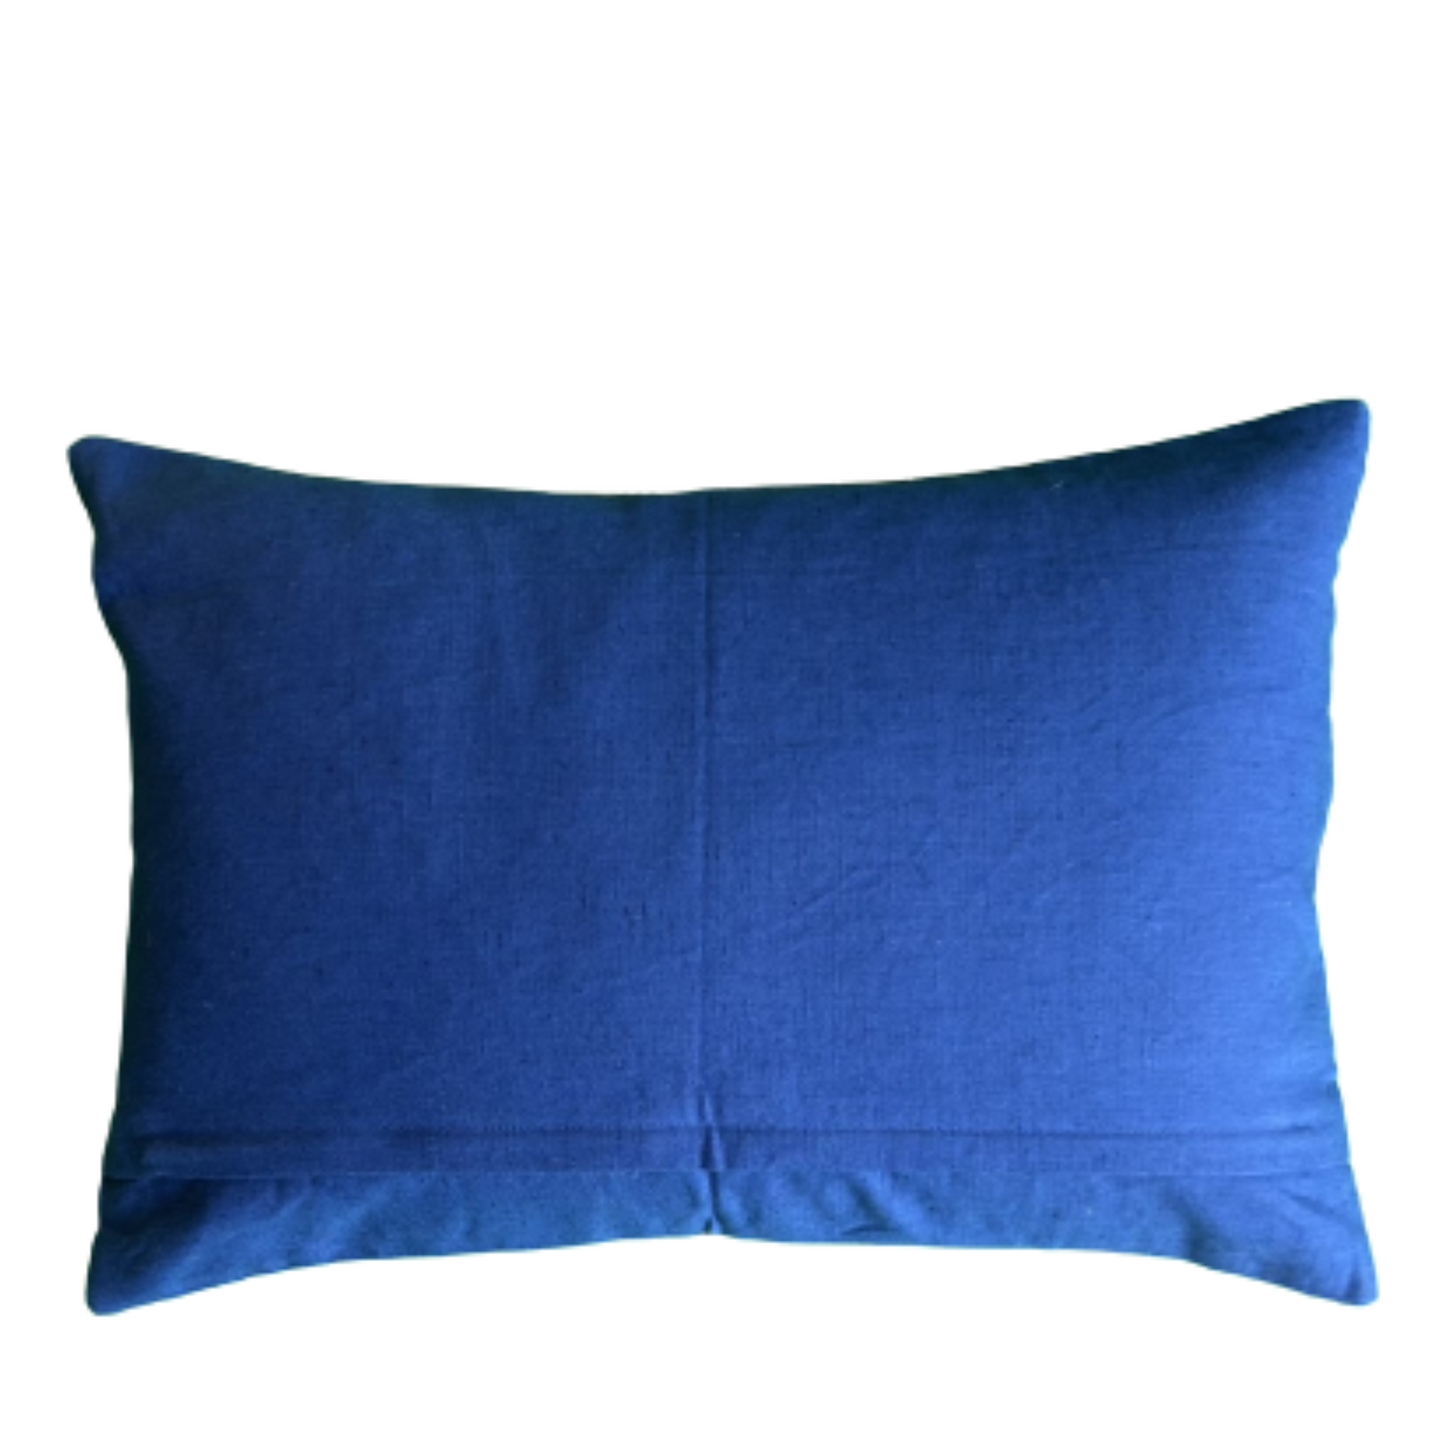 Embroidered John Robshaw Blue Suzani 12 x 18 Rectangle Decorative Pillow with Down Feather Insert